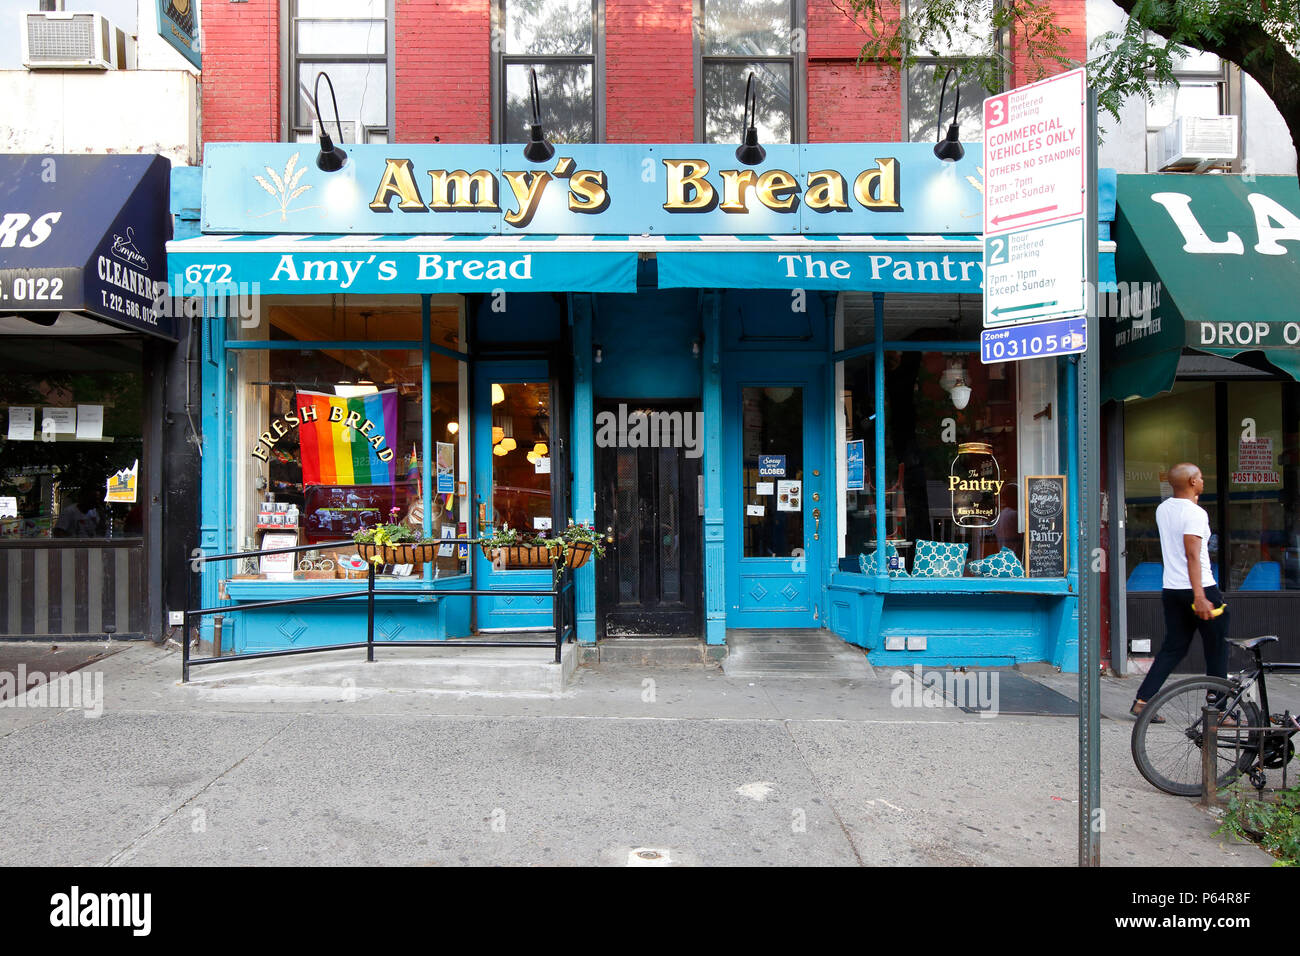 Amy's Bread, 672 9th Ave, New York, NY. exterior storefront of a bakery and cafe in the Hells Kitchen neighborhood of Manhattan. Stock Photo